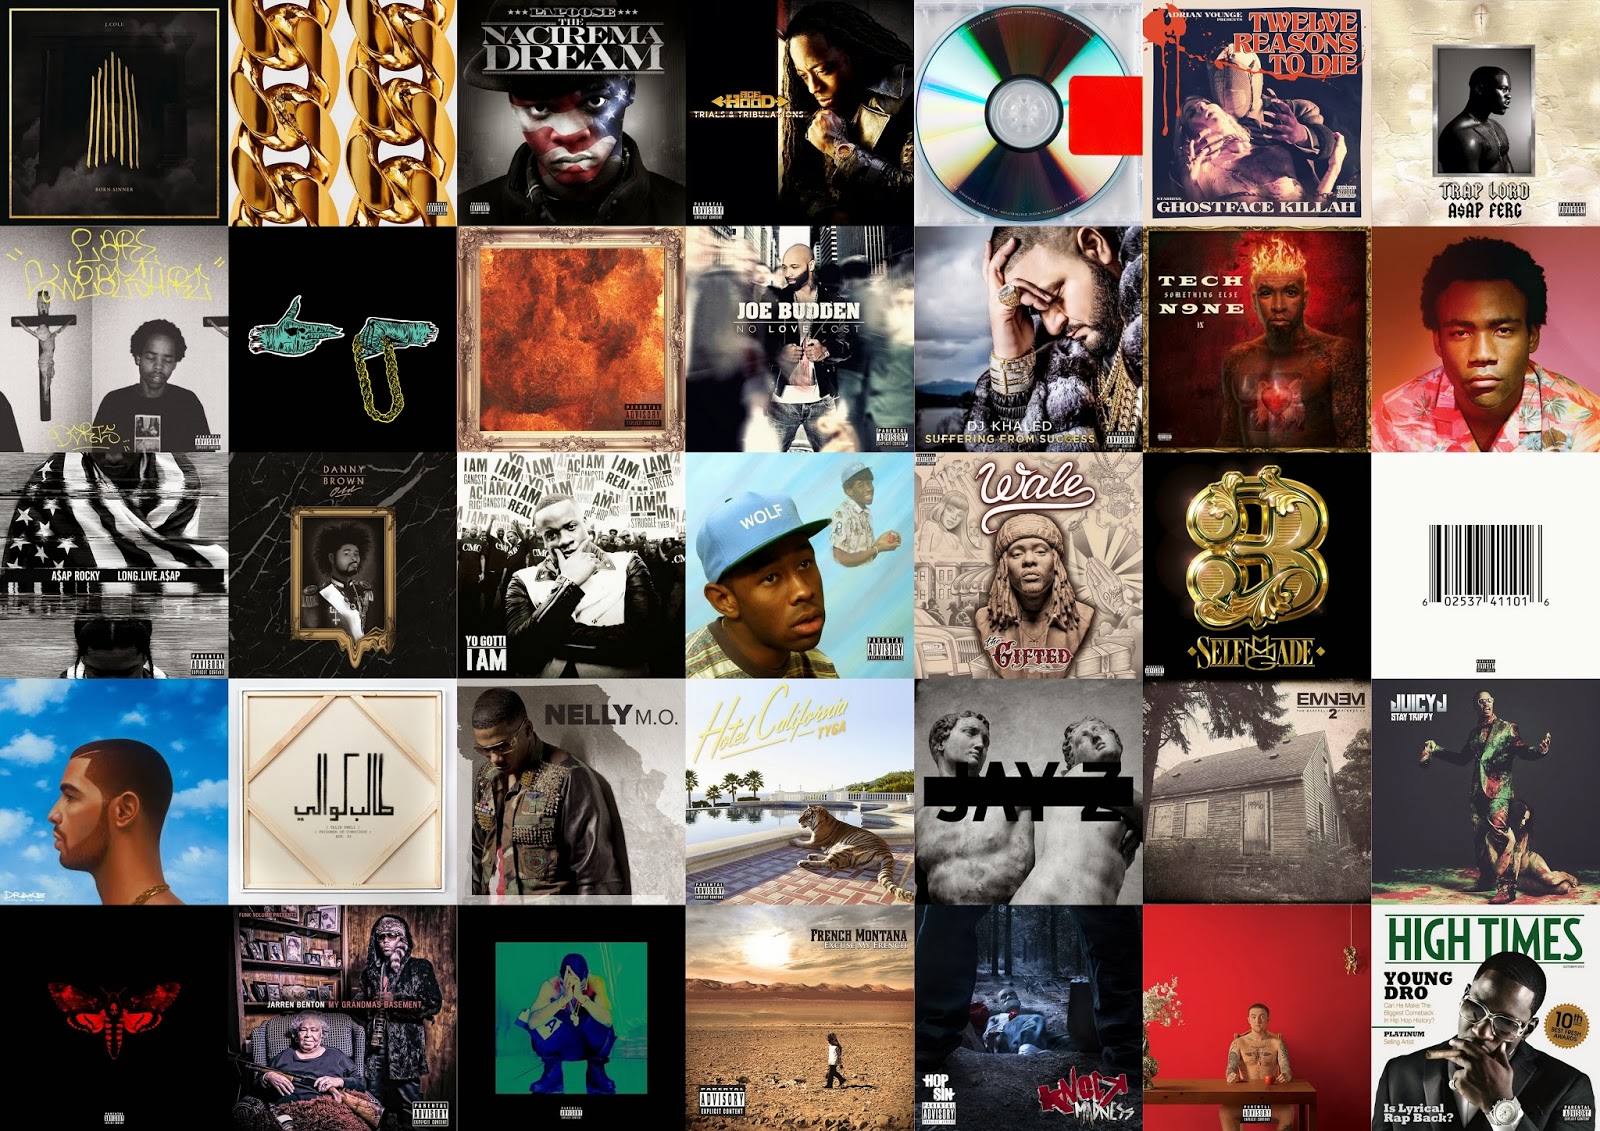 A collage of album covers from different music genres, including hip-hop, rap, pop, rock, and country.